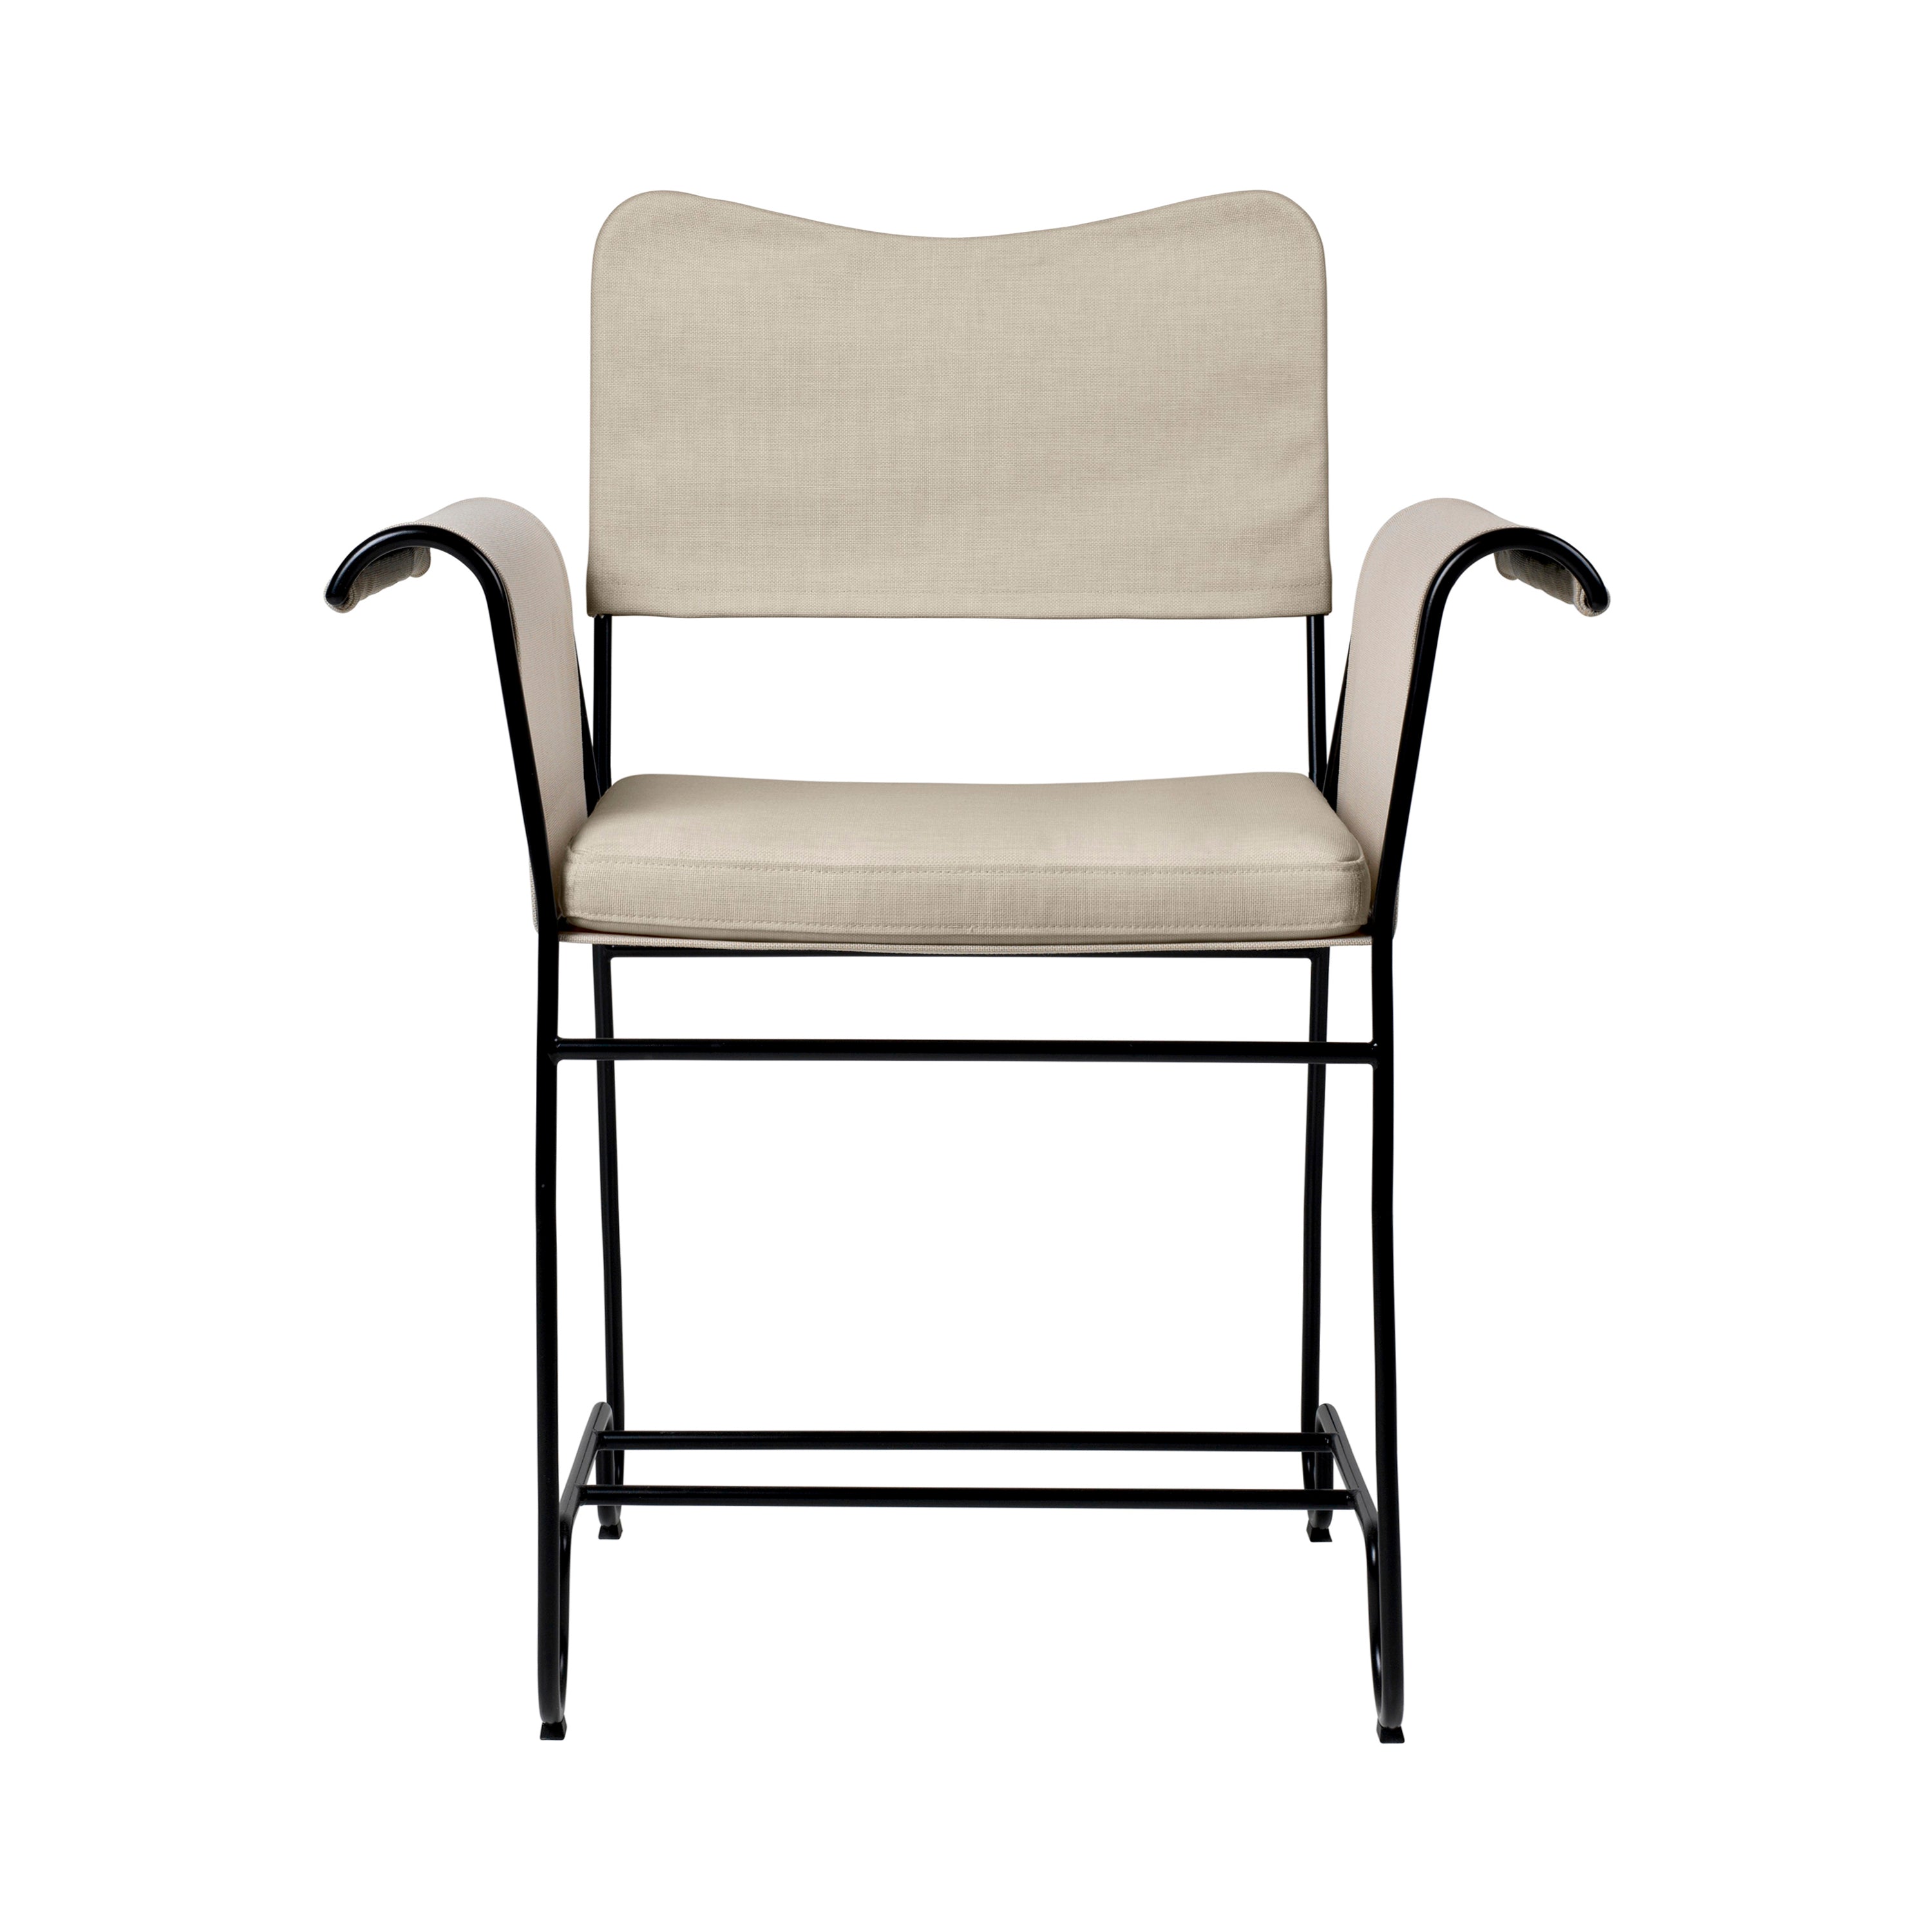 Tropique Dining Chair: Outdoor + Without Fringes + Black + Leslie 12